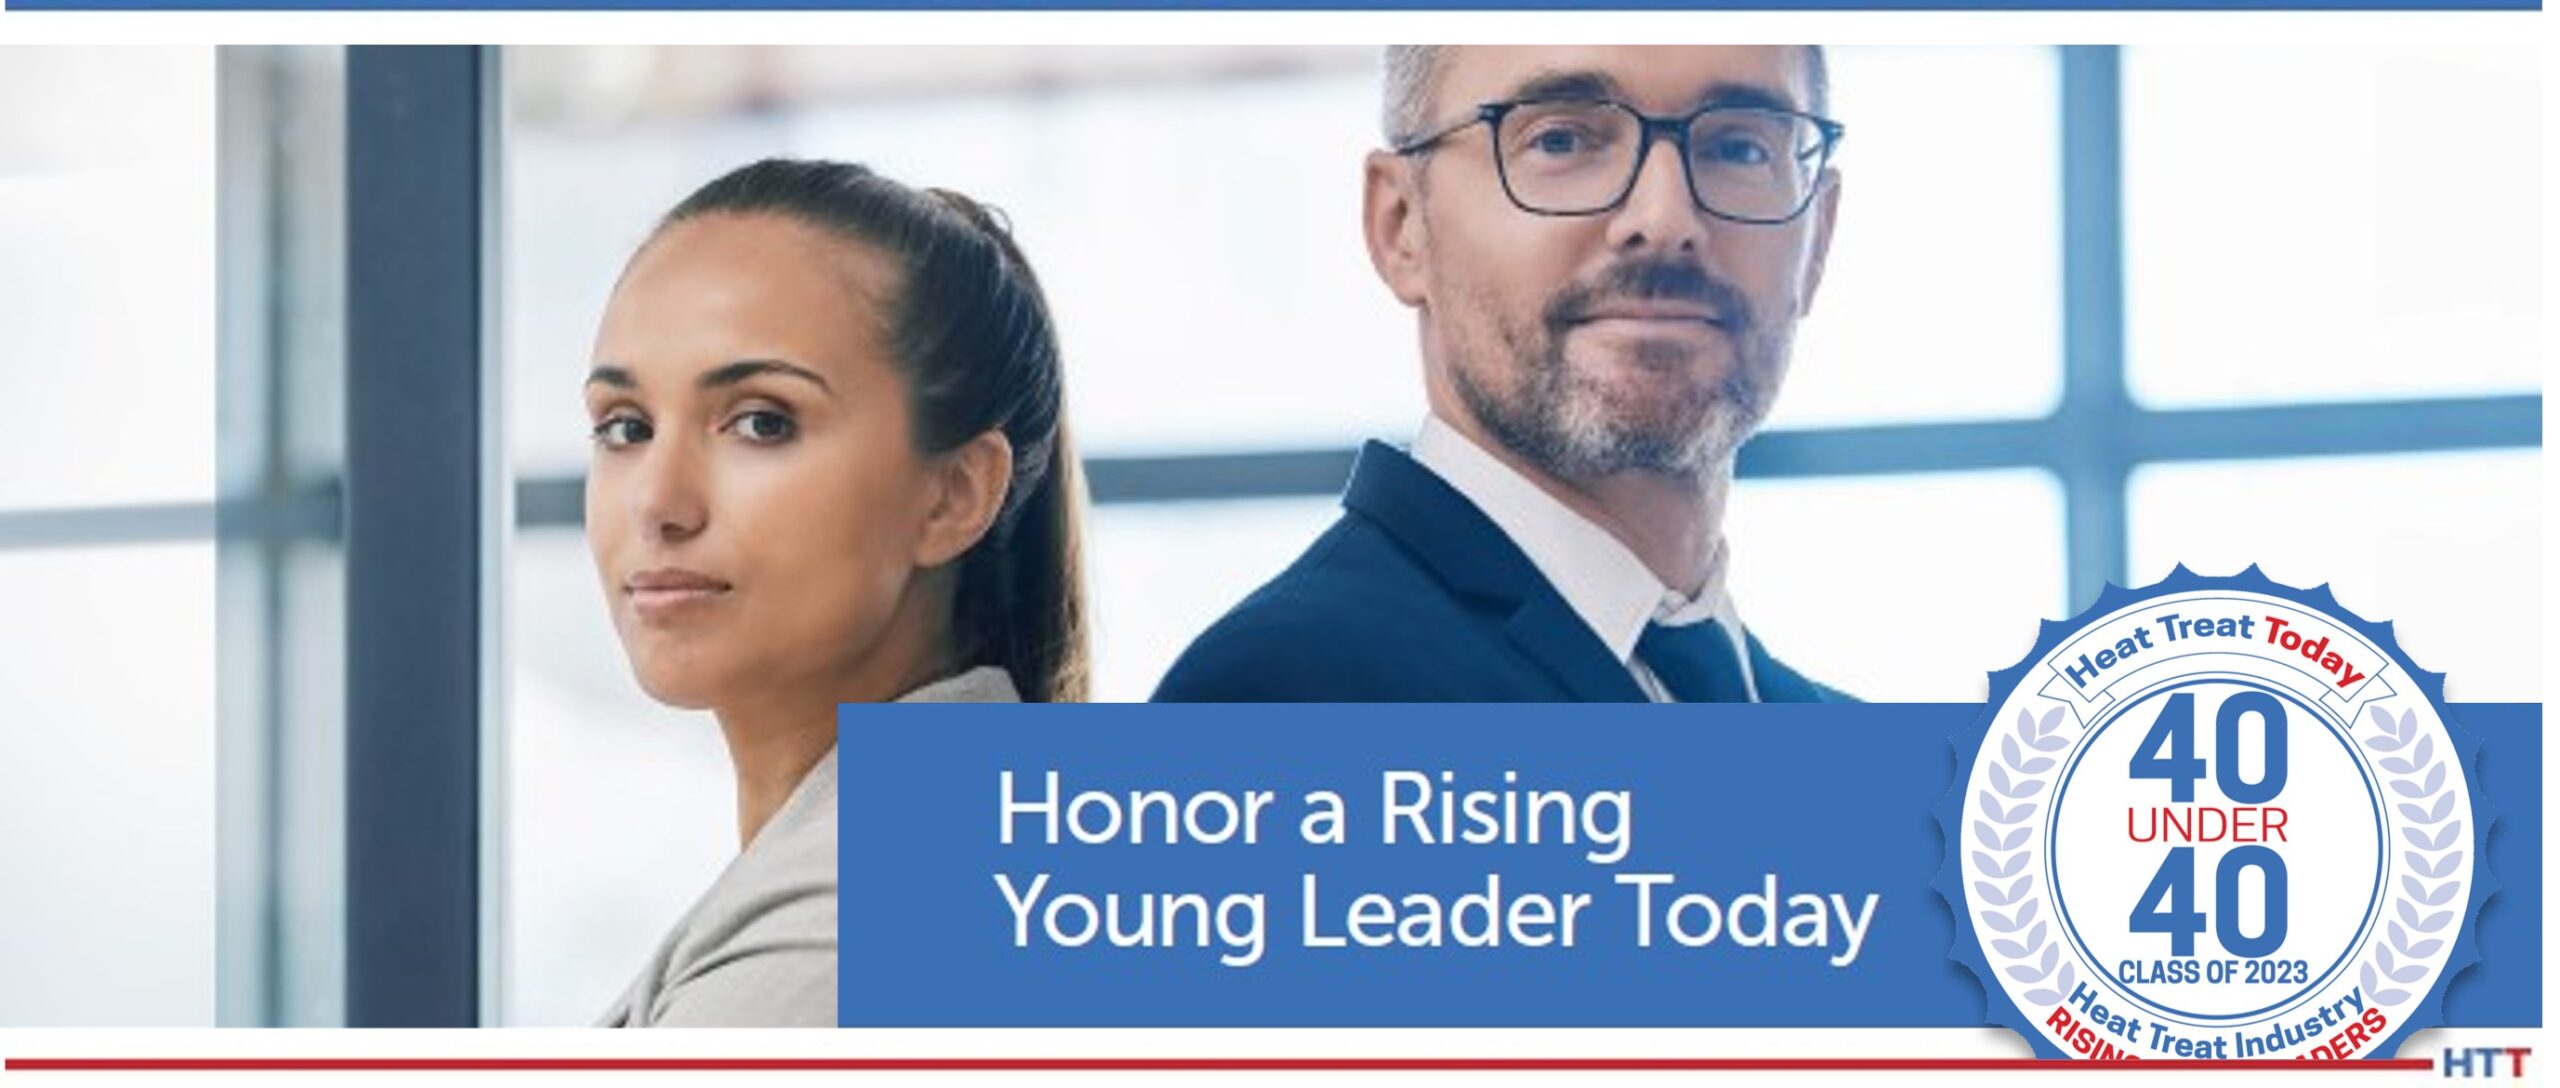 Nominate a rising young leader